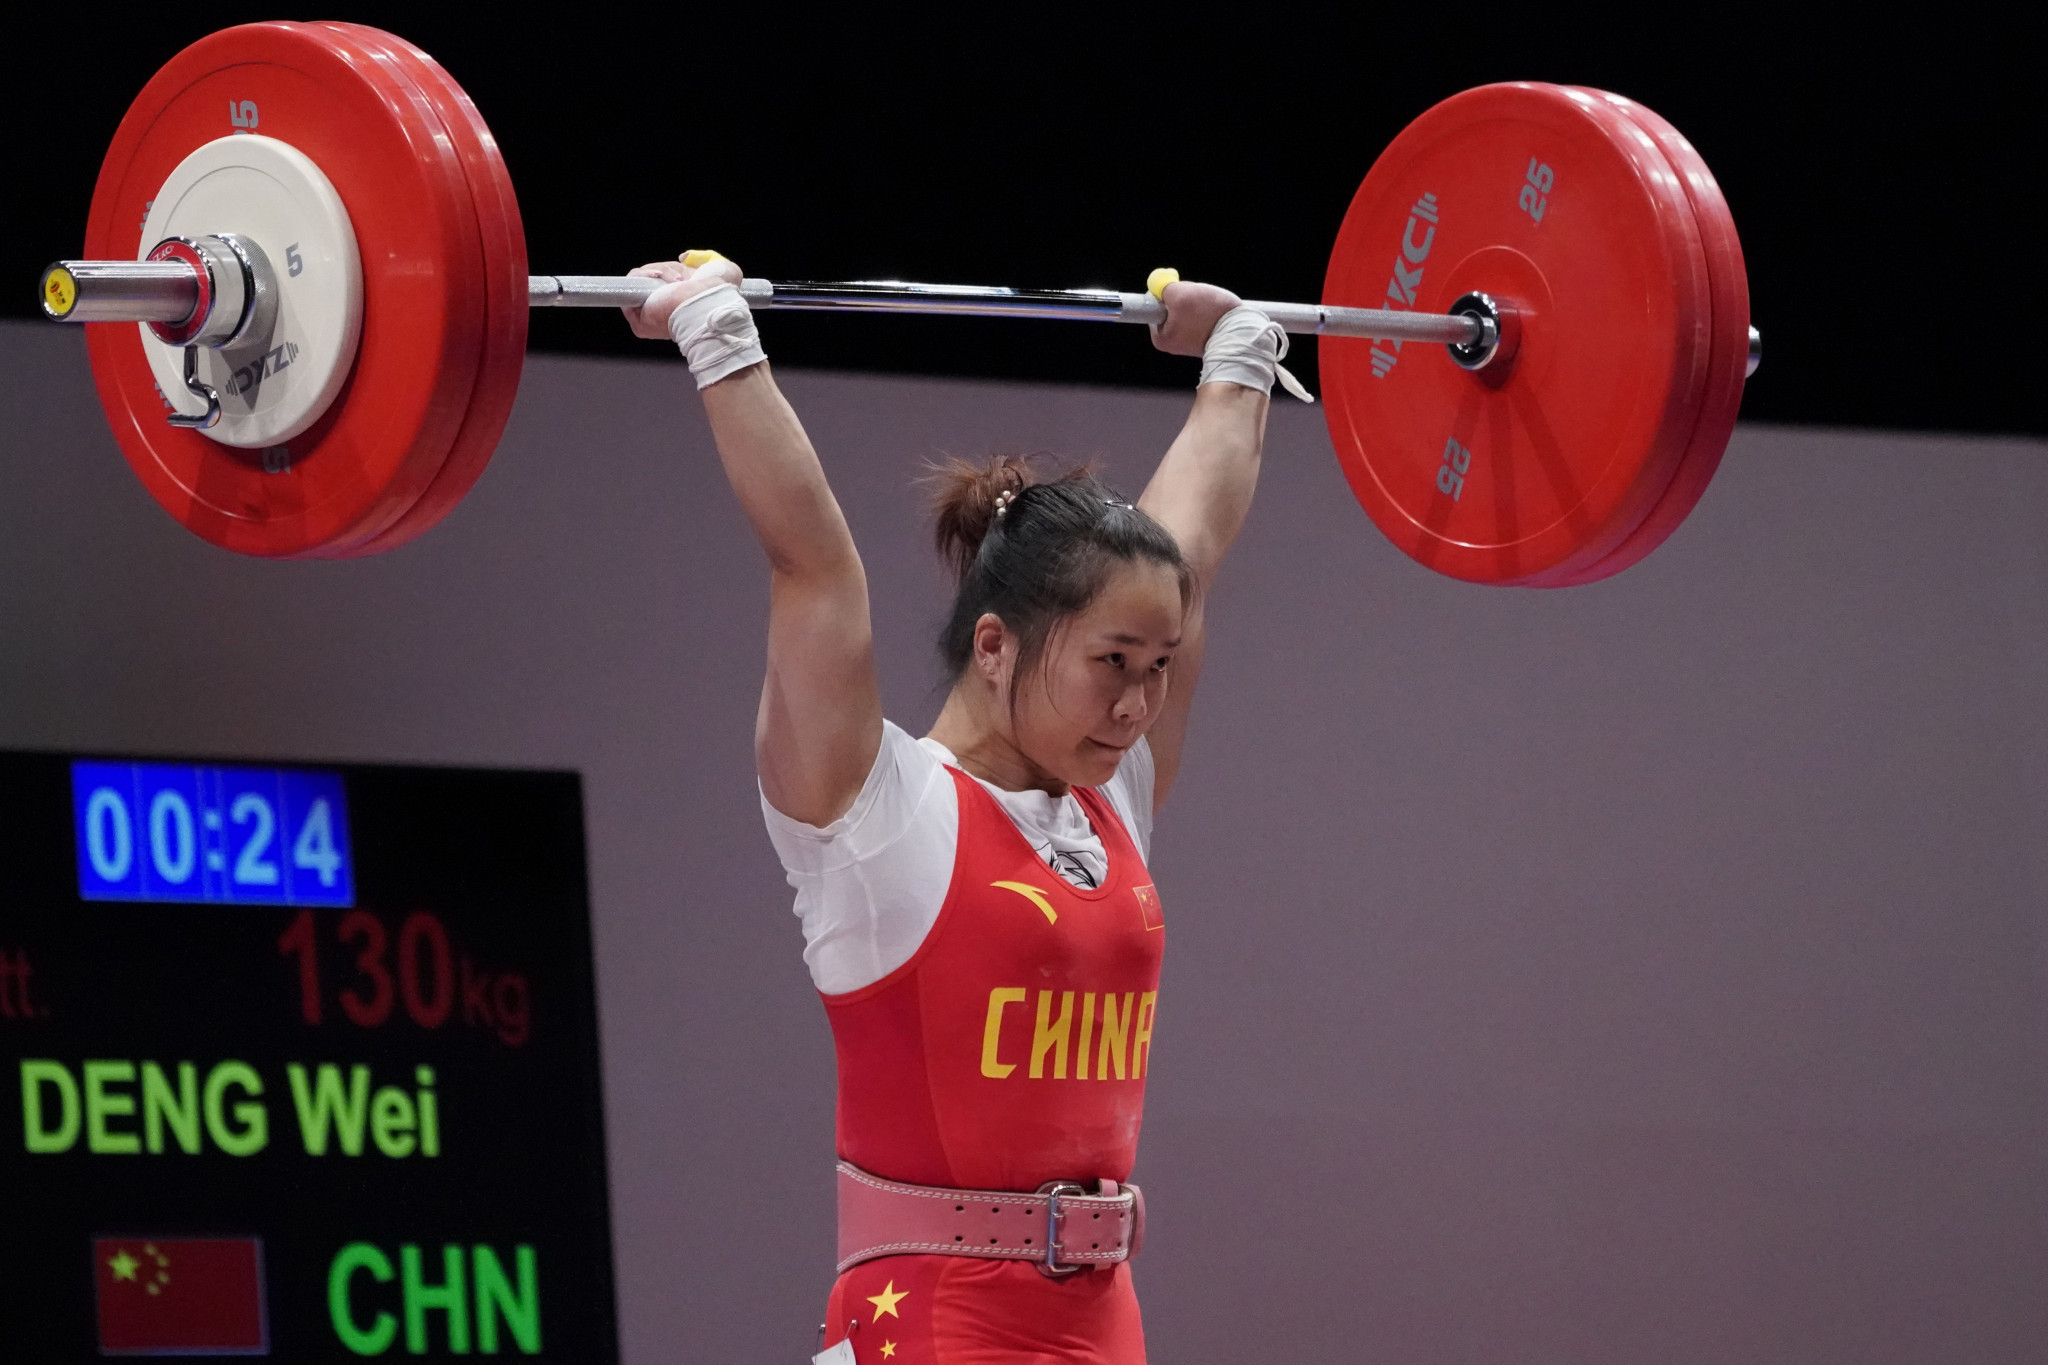 China's Deng Wei competing at the Tokyo 2020 test event ©Getty Images